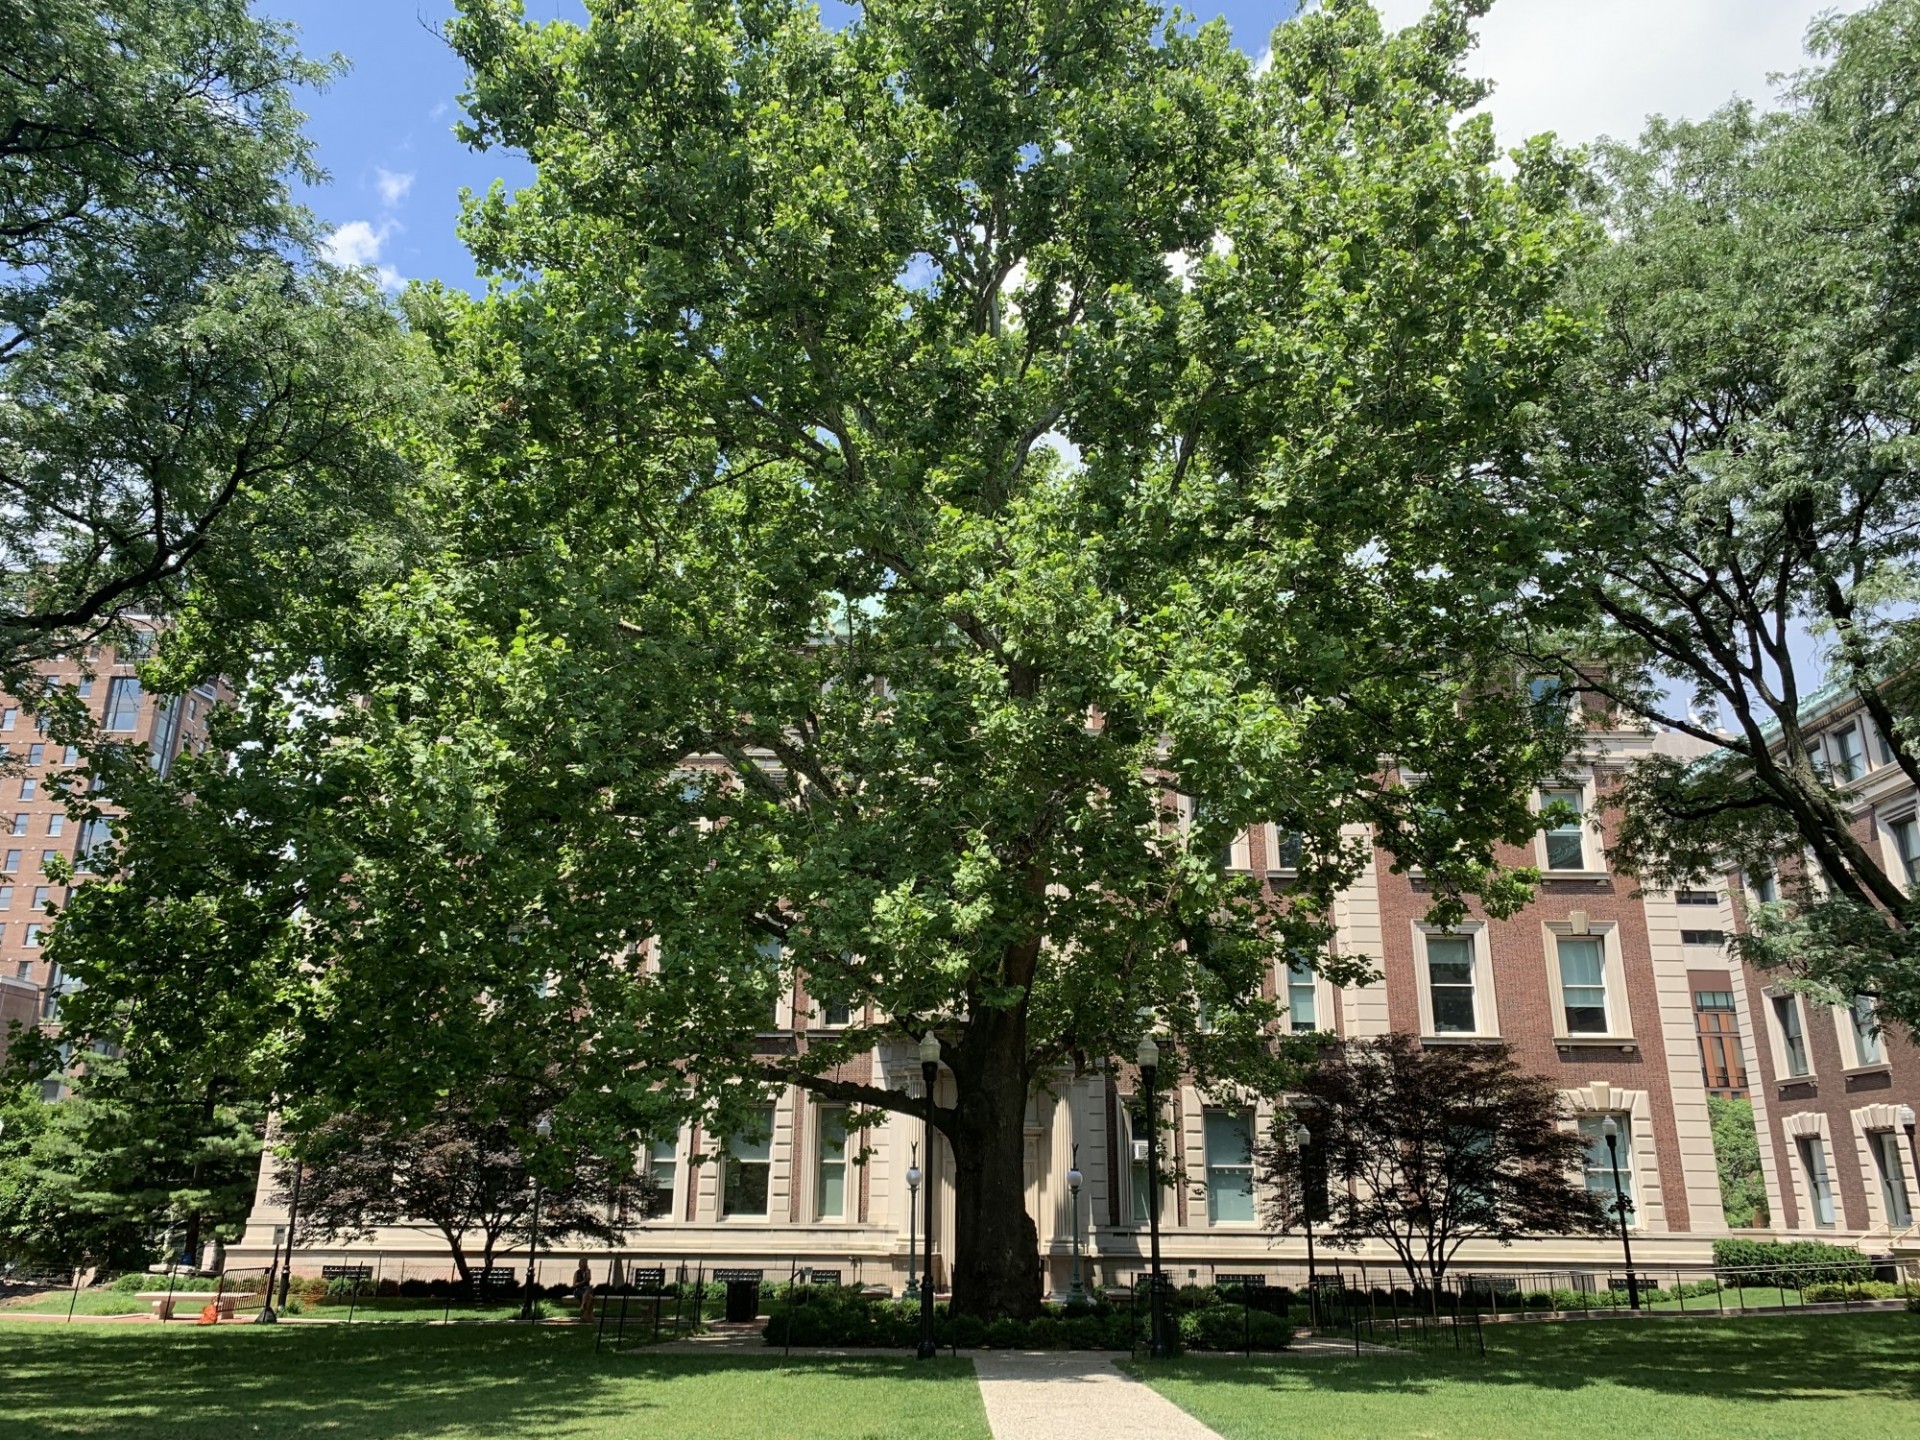 A large sycamore tree in front of the Mathematics building.